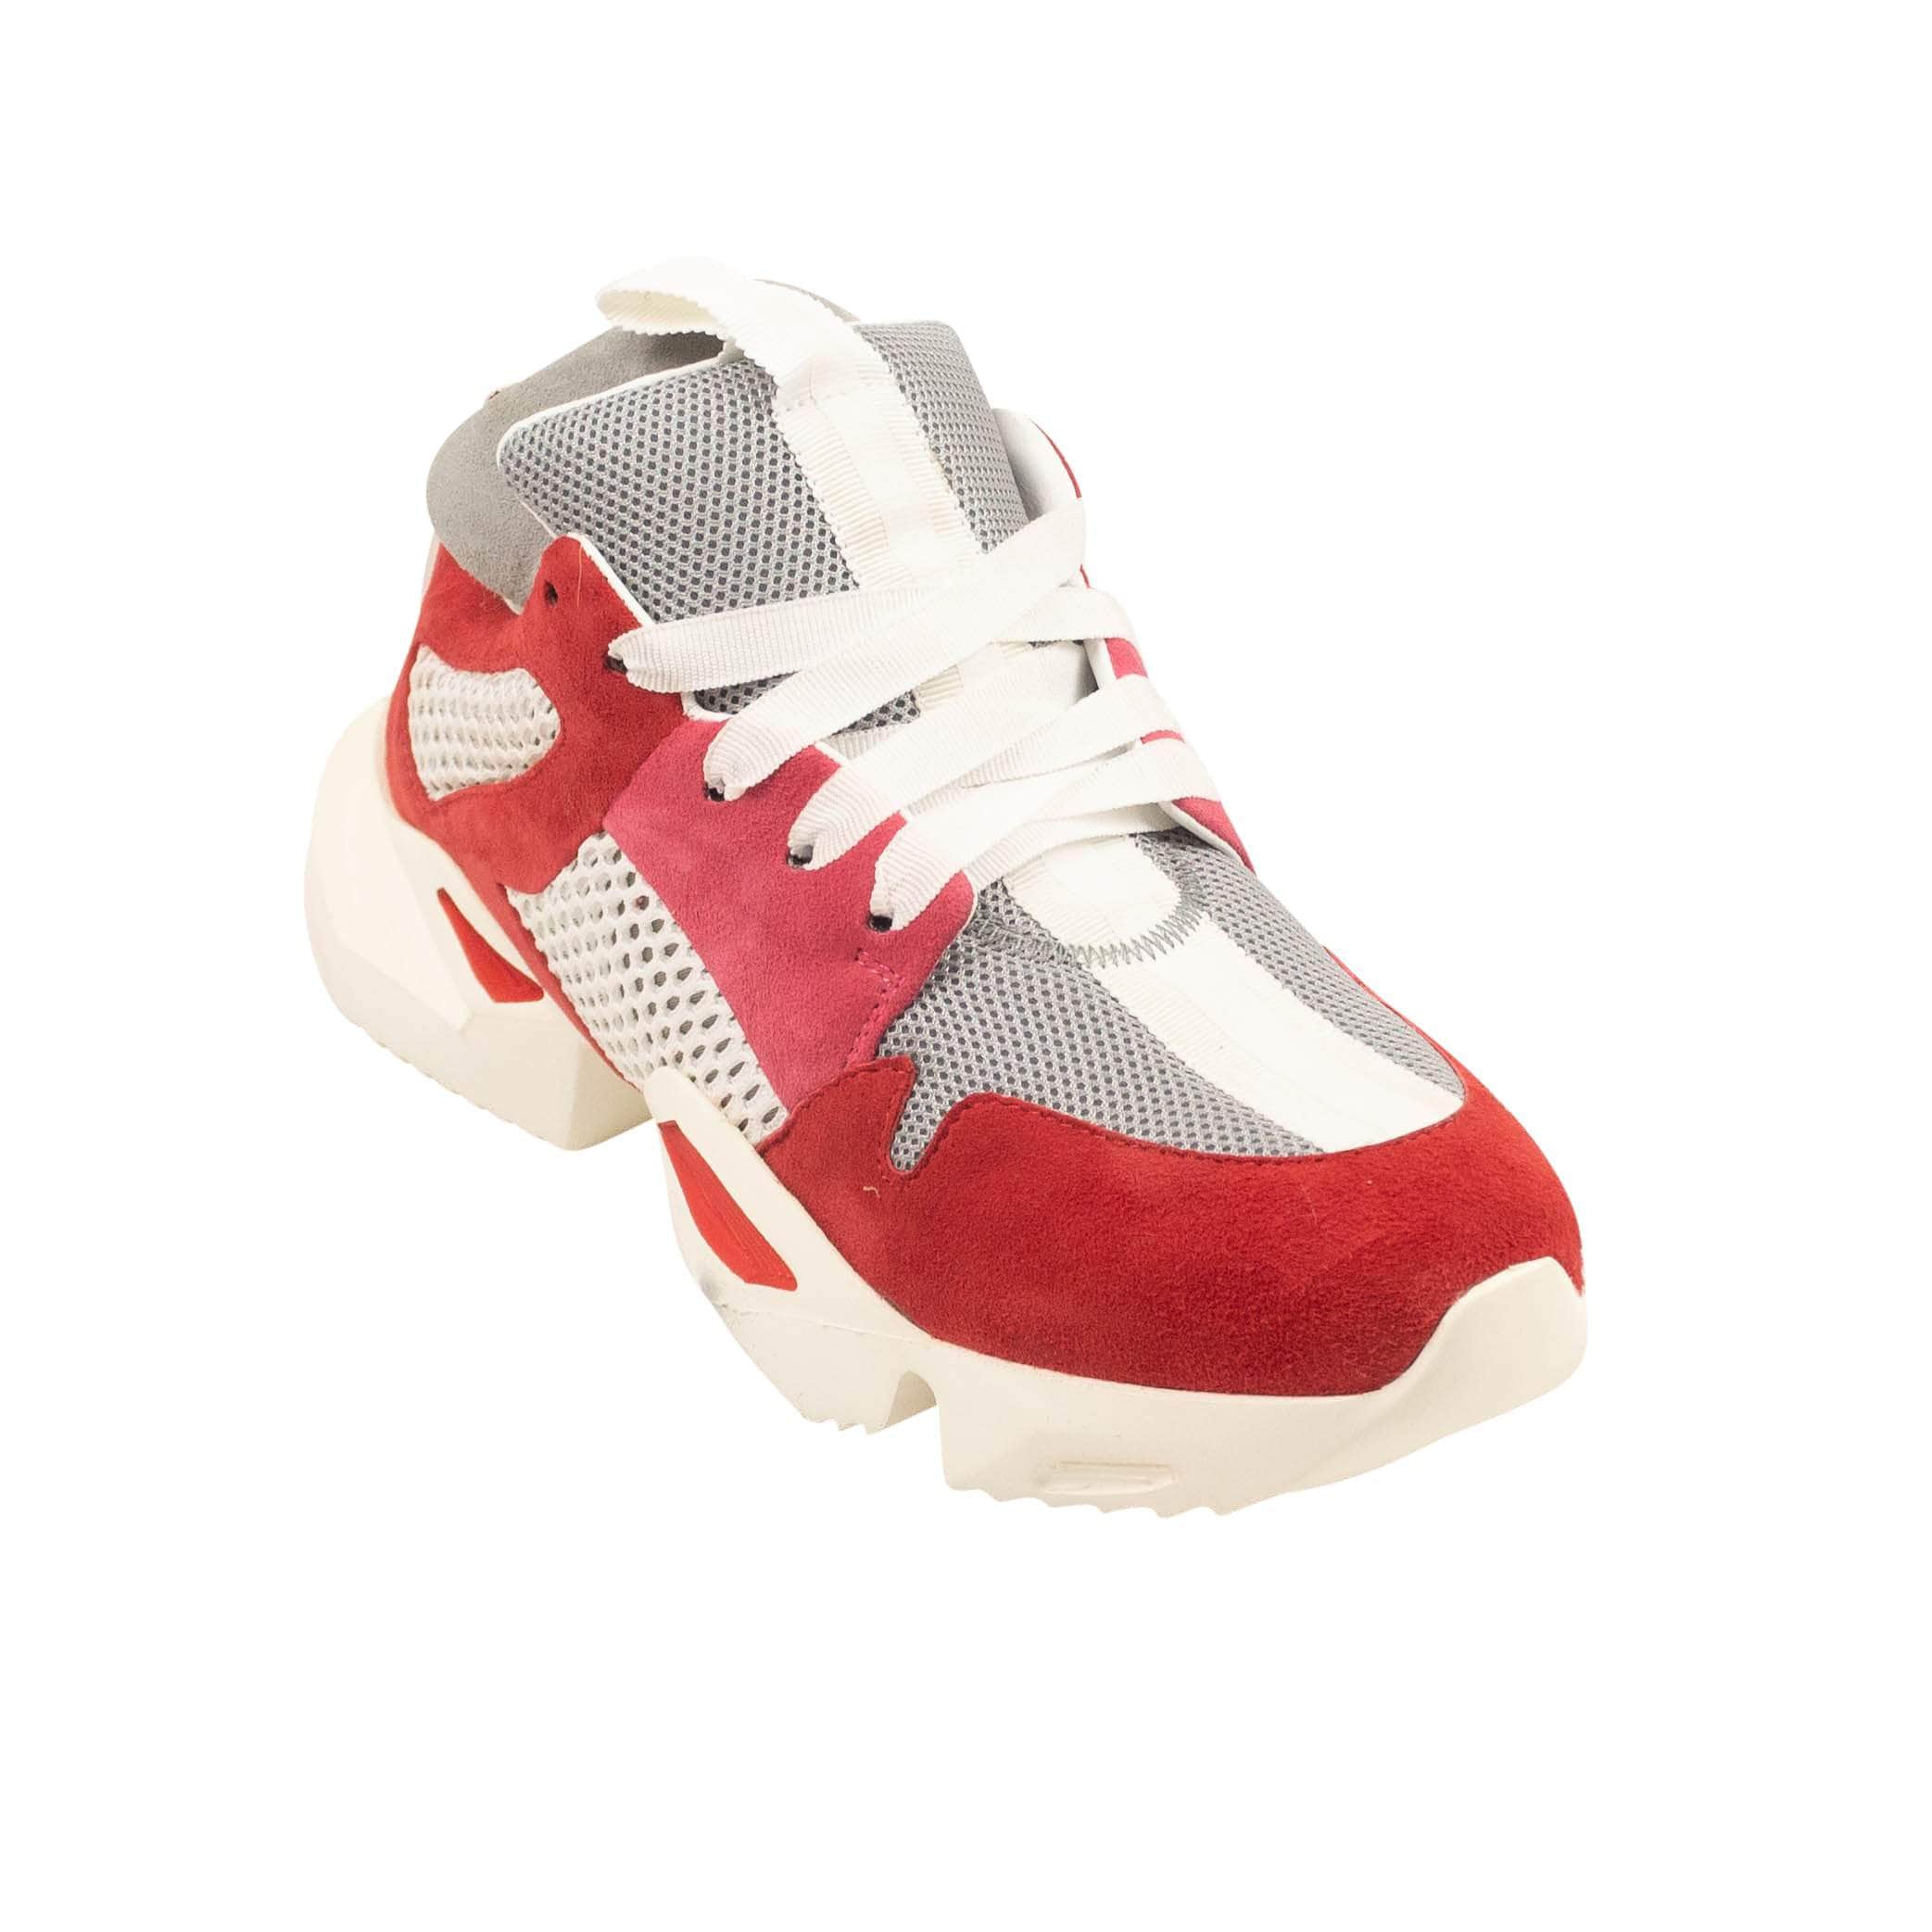 Unravel Project couponcollection, gender-womens, main-shoes, size-39, uncategorized, under-250, unravel-project 39 / JF6-UN-2004/39 Red, Pink And Grey Mesh Suede Sneakers JF6-UN-2004/39 JF6-UN-2004/39